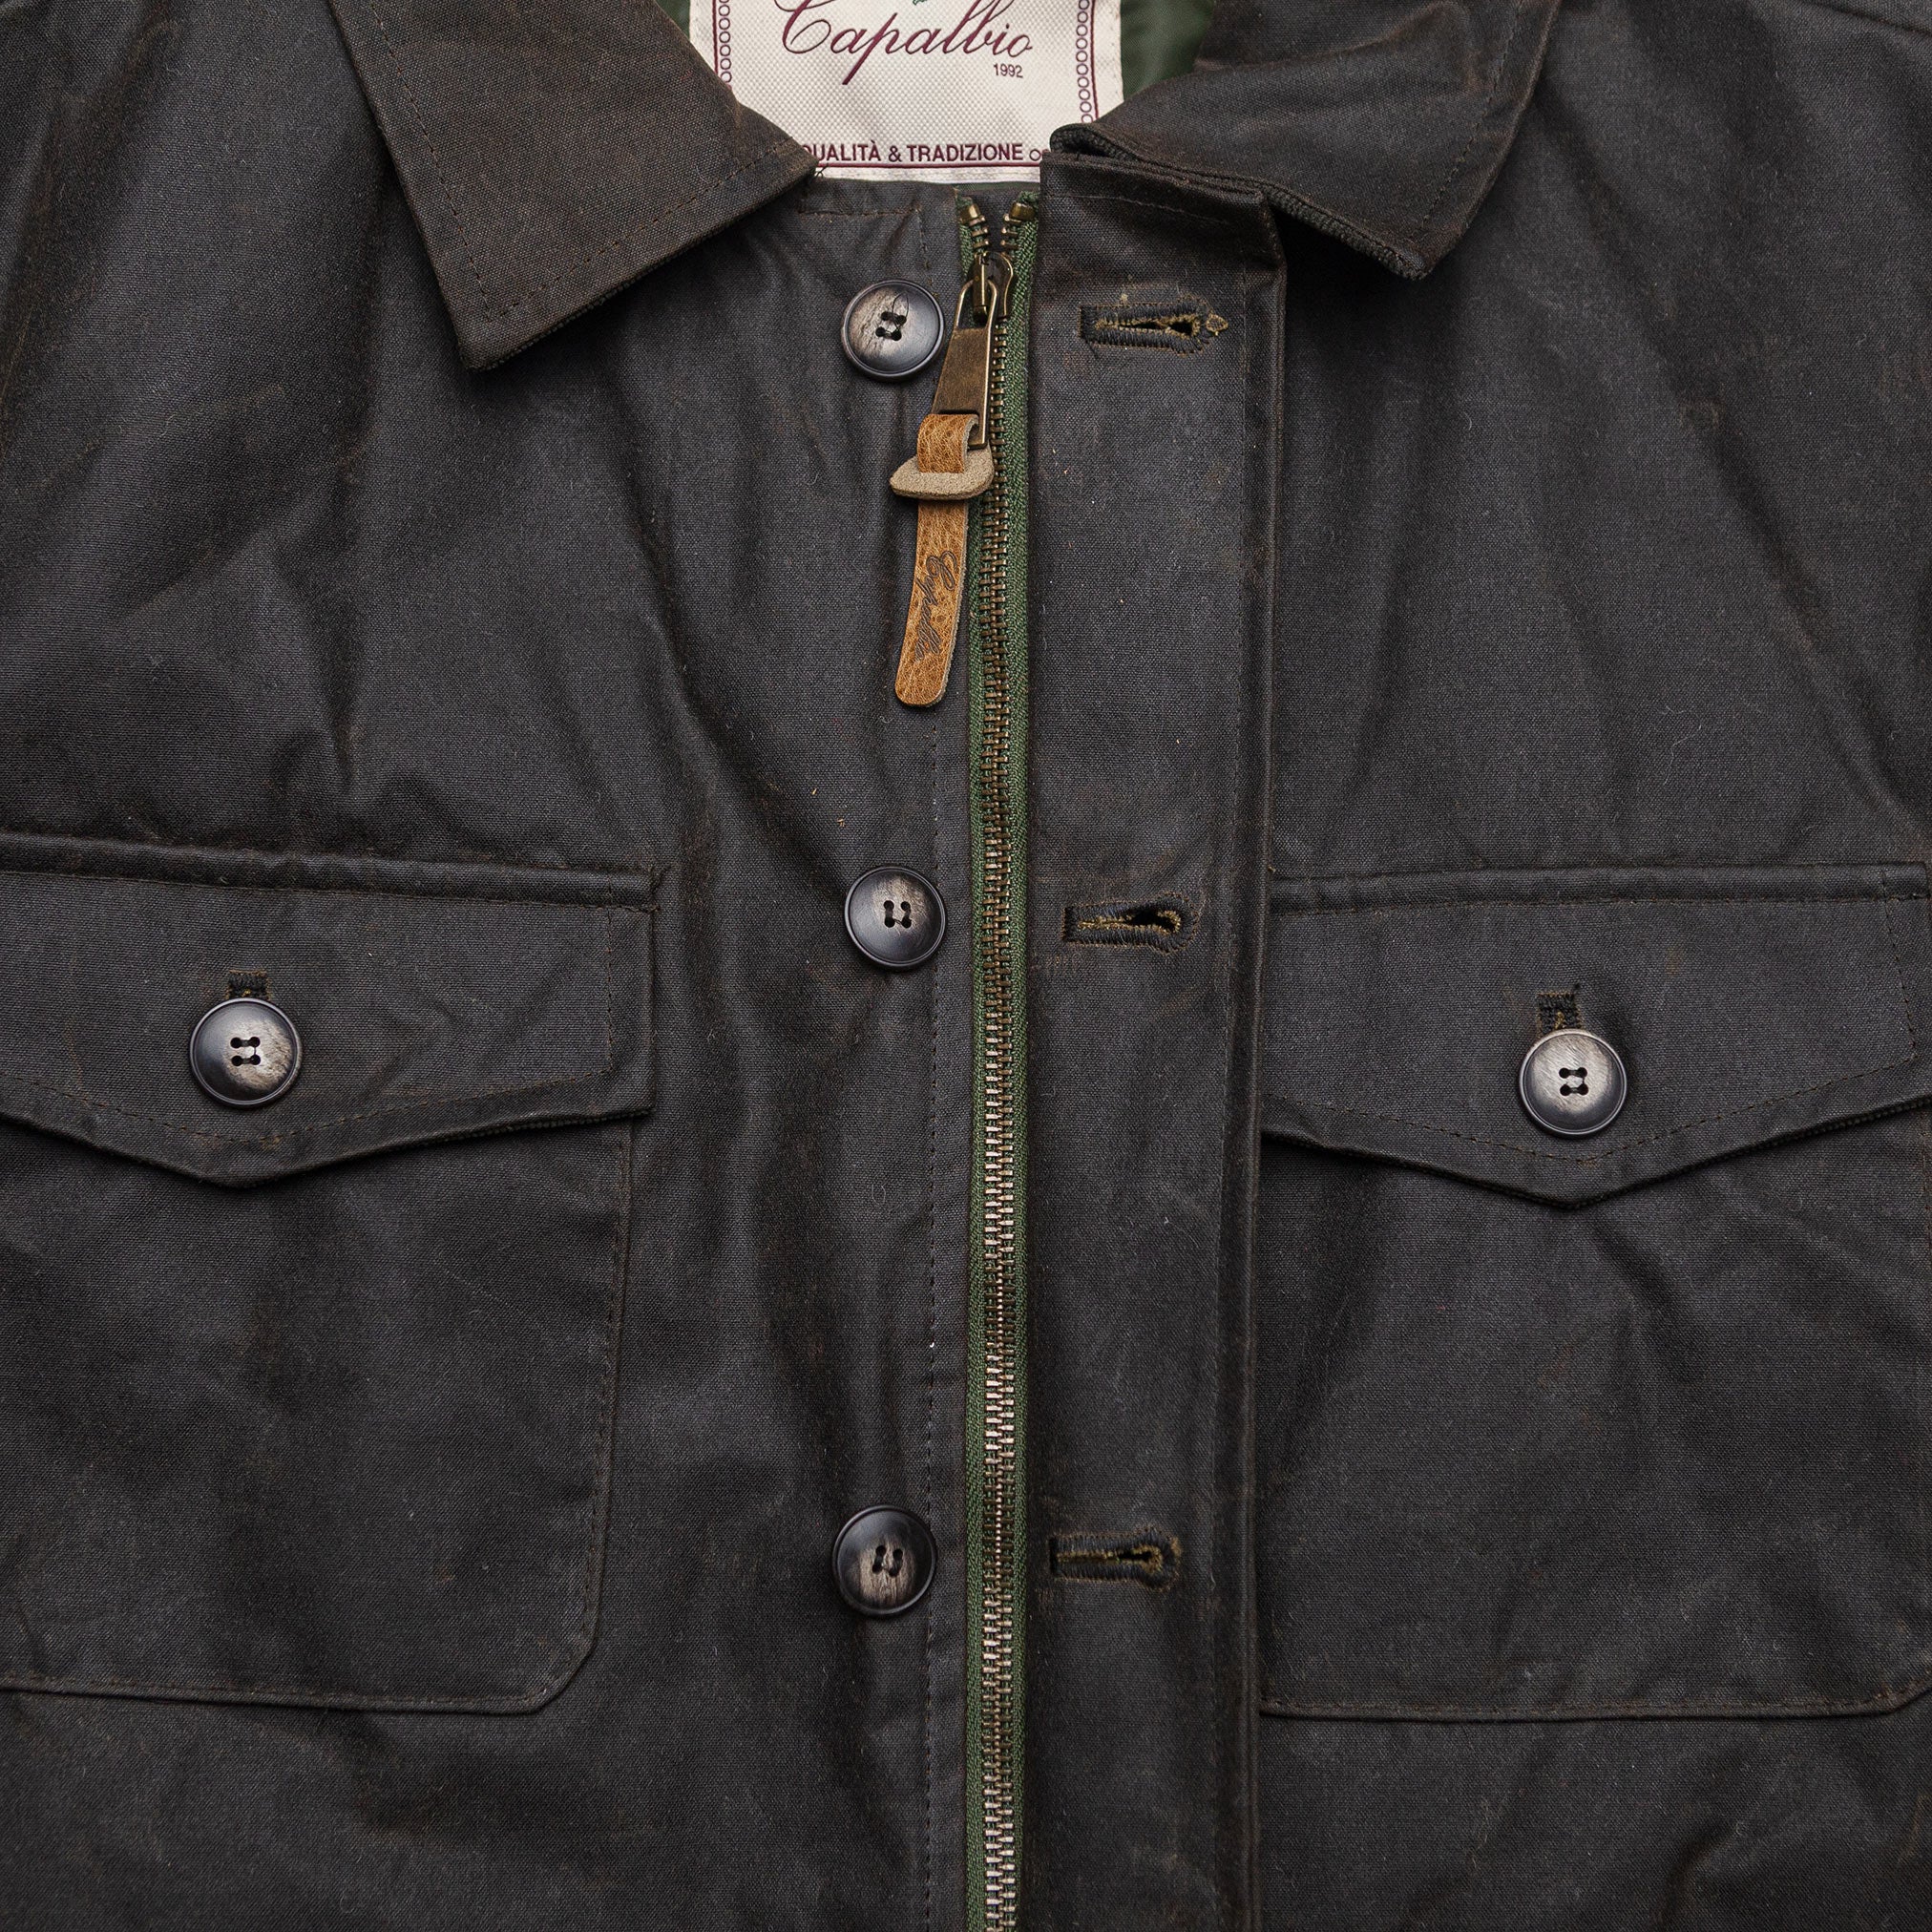 Lined Field Jacket in Waxed Olive